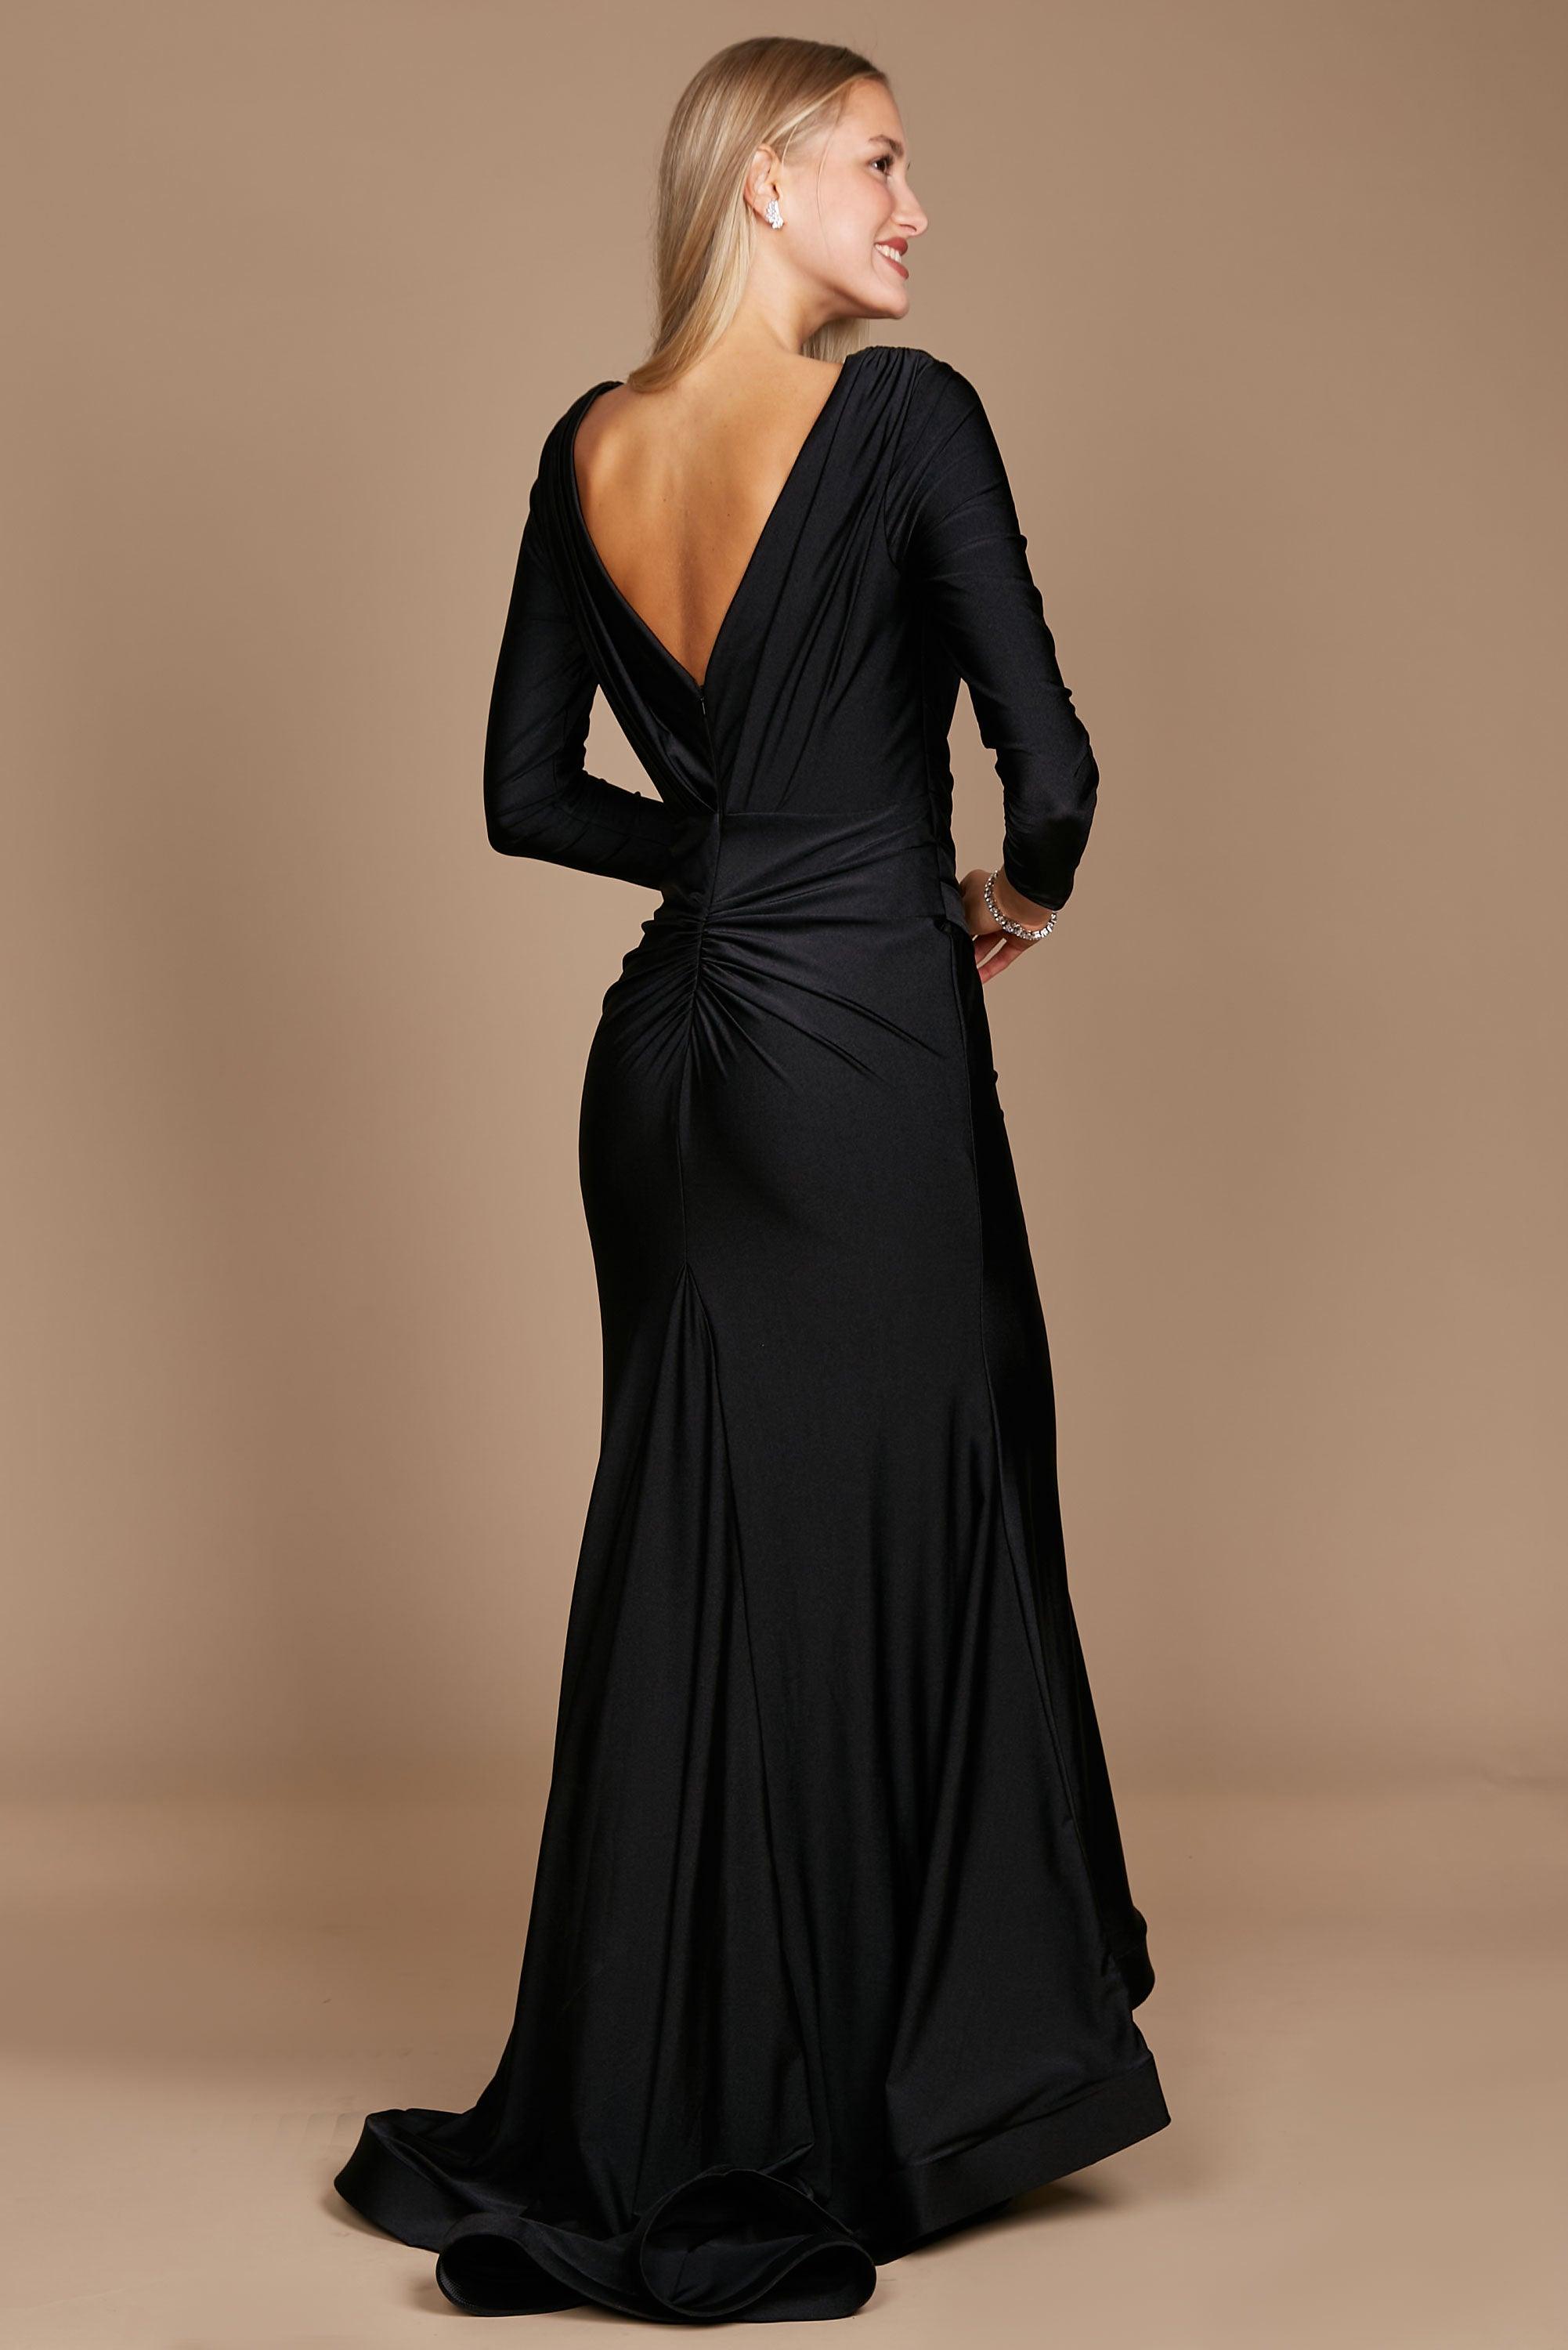 One Shoulder Cut Out Black Prom Dress With Slit | KissProm